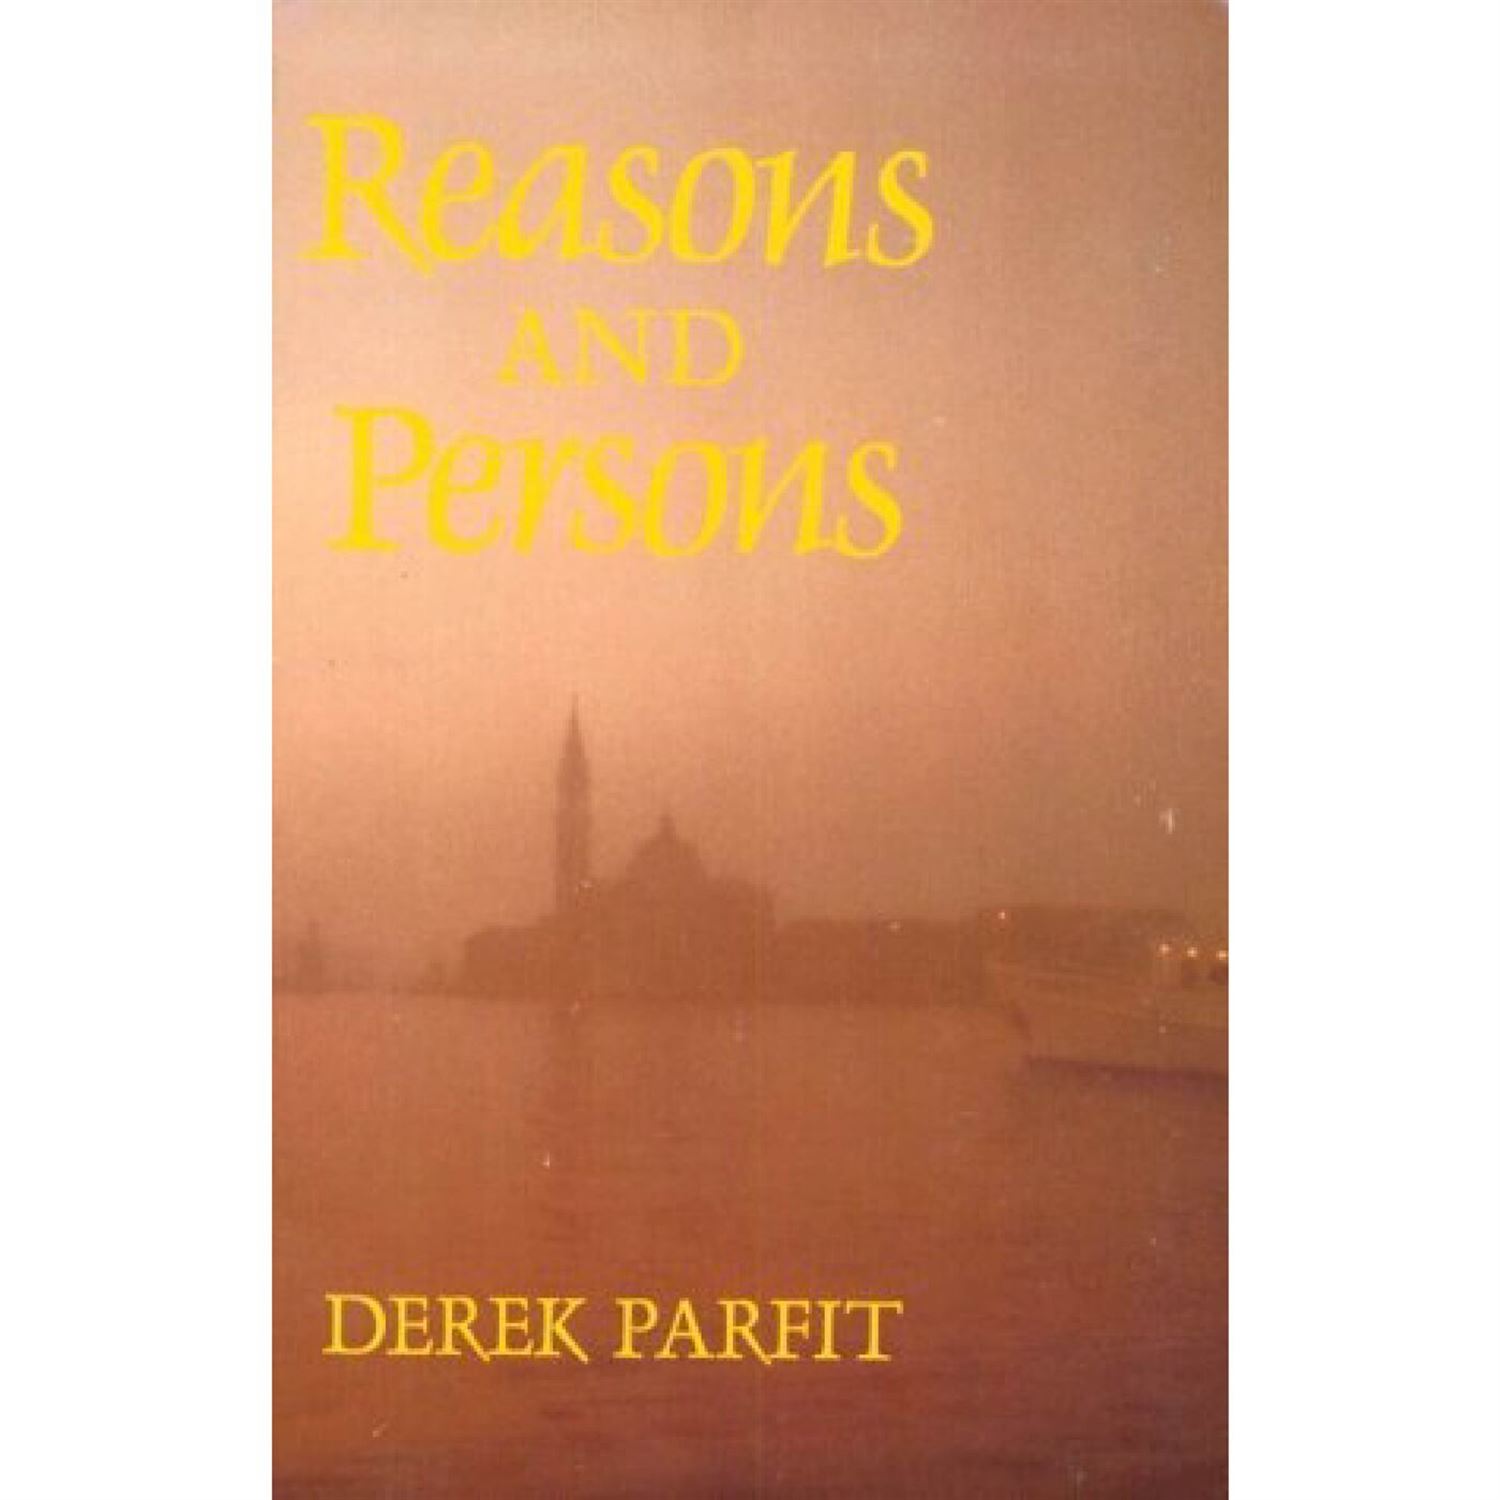 Reasons And Persons by Derek Parfit